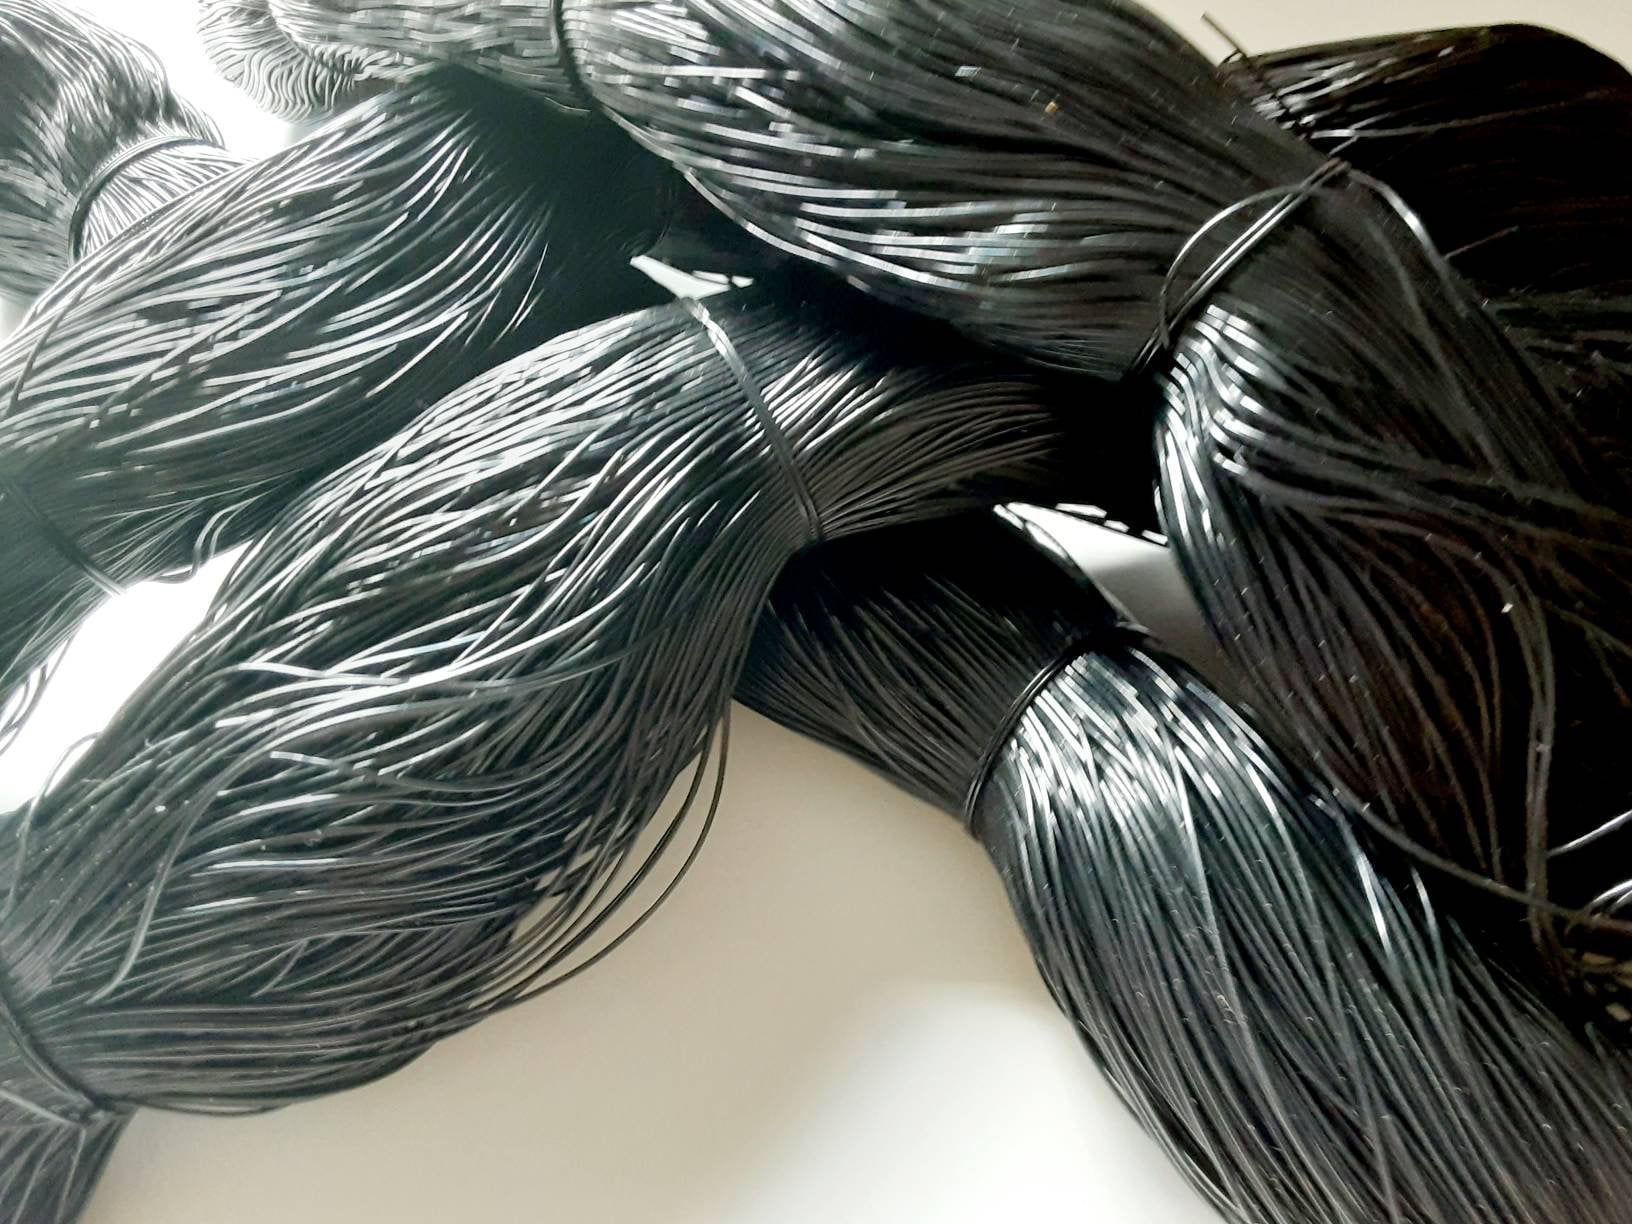 3 New African Rubber Hair Thread For Threading/Stretching Out Natural Hair